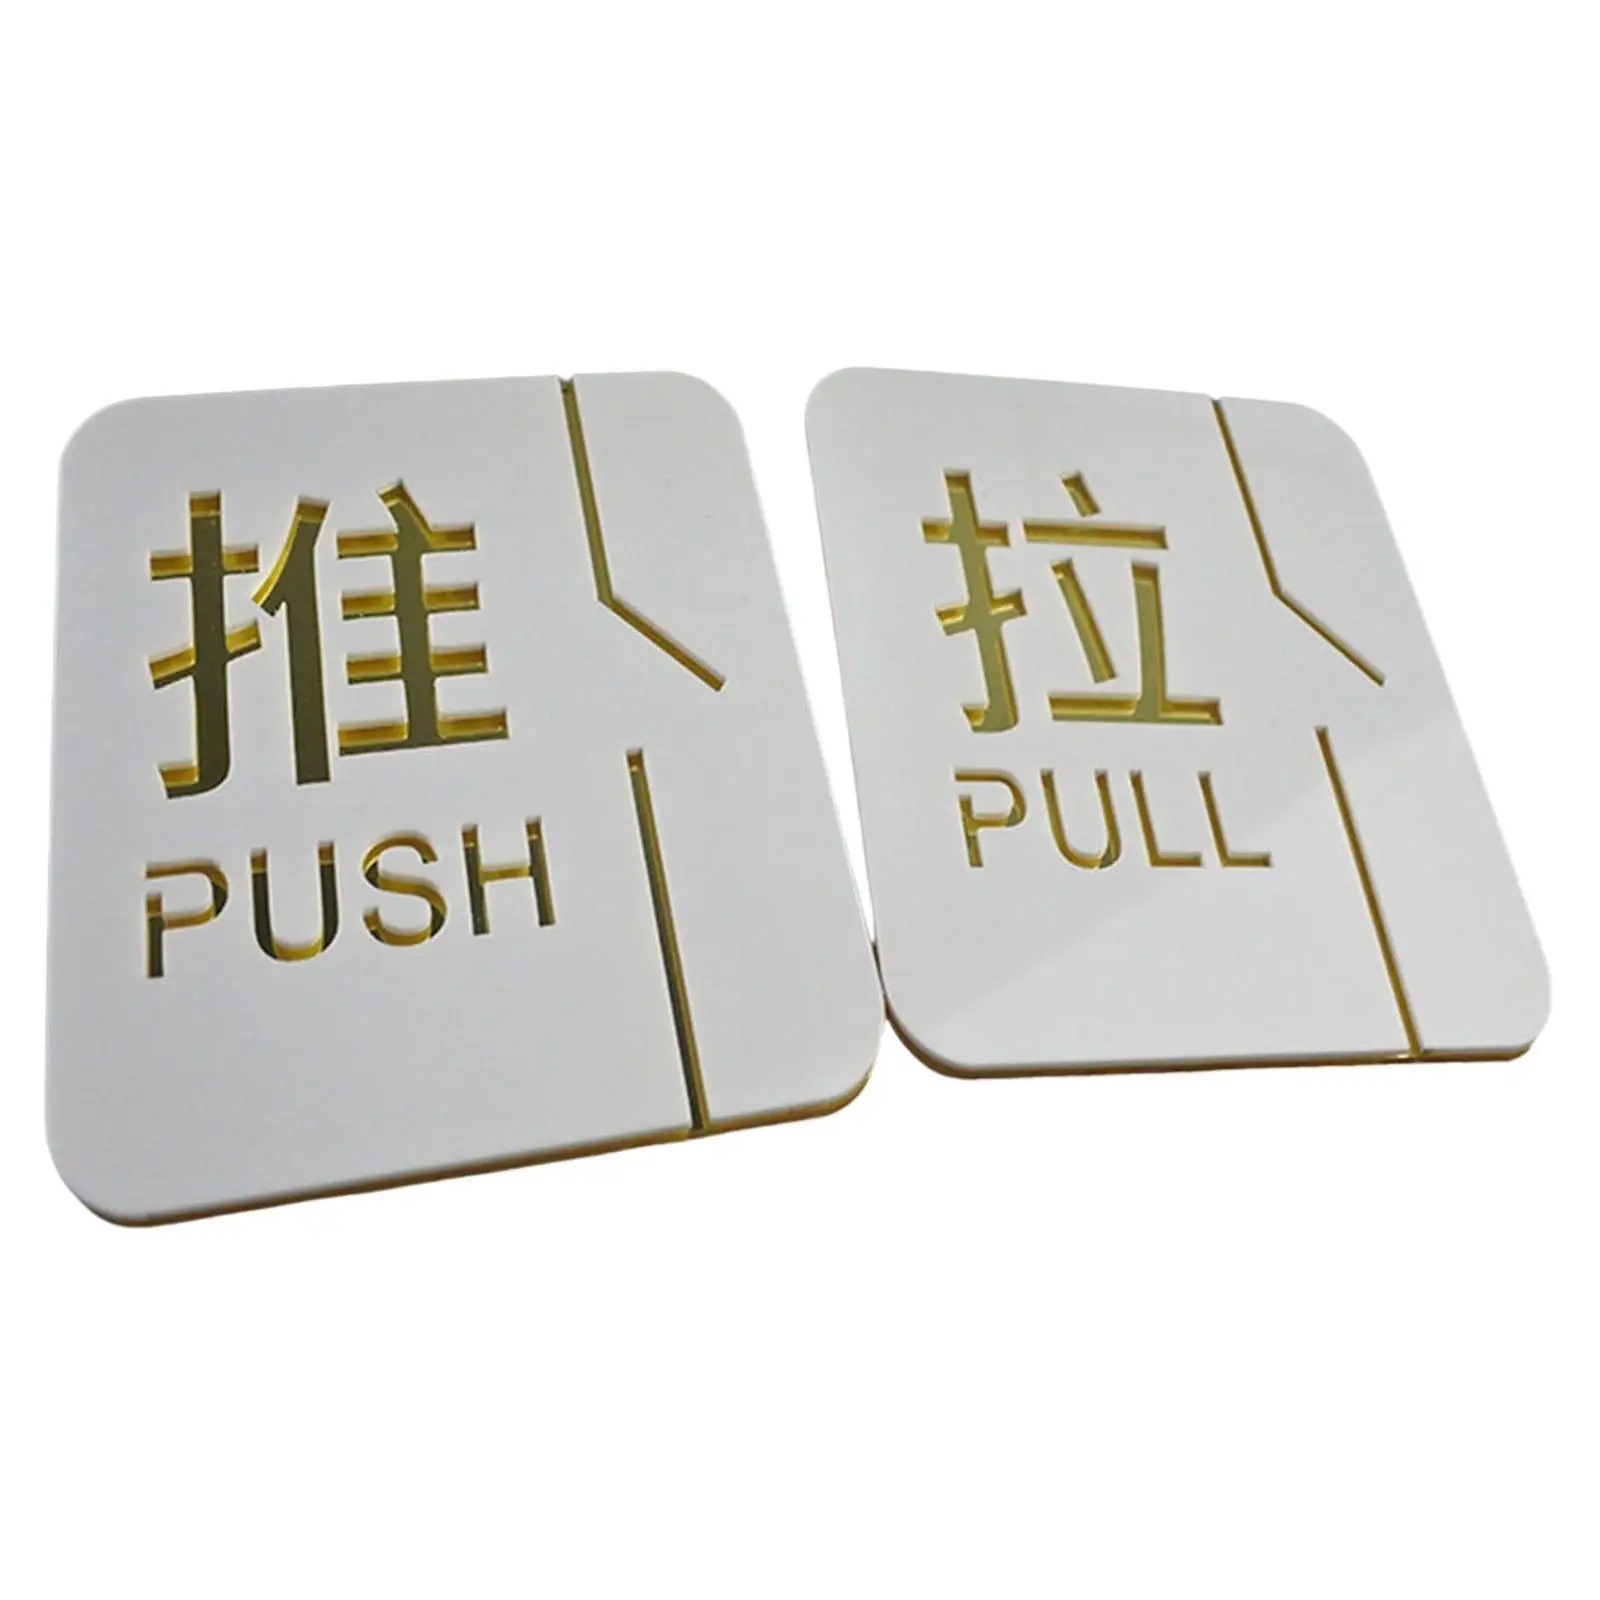 Push and pull stickers, door hangers, fade resistant signage for restaurants,